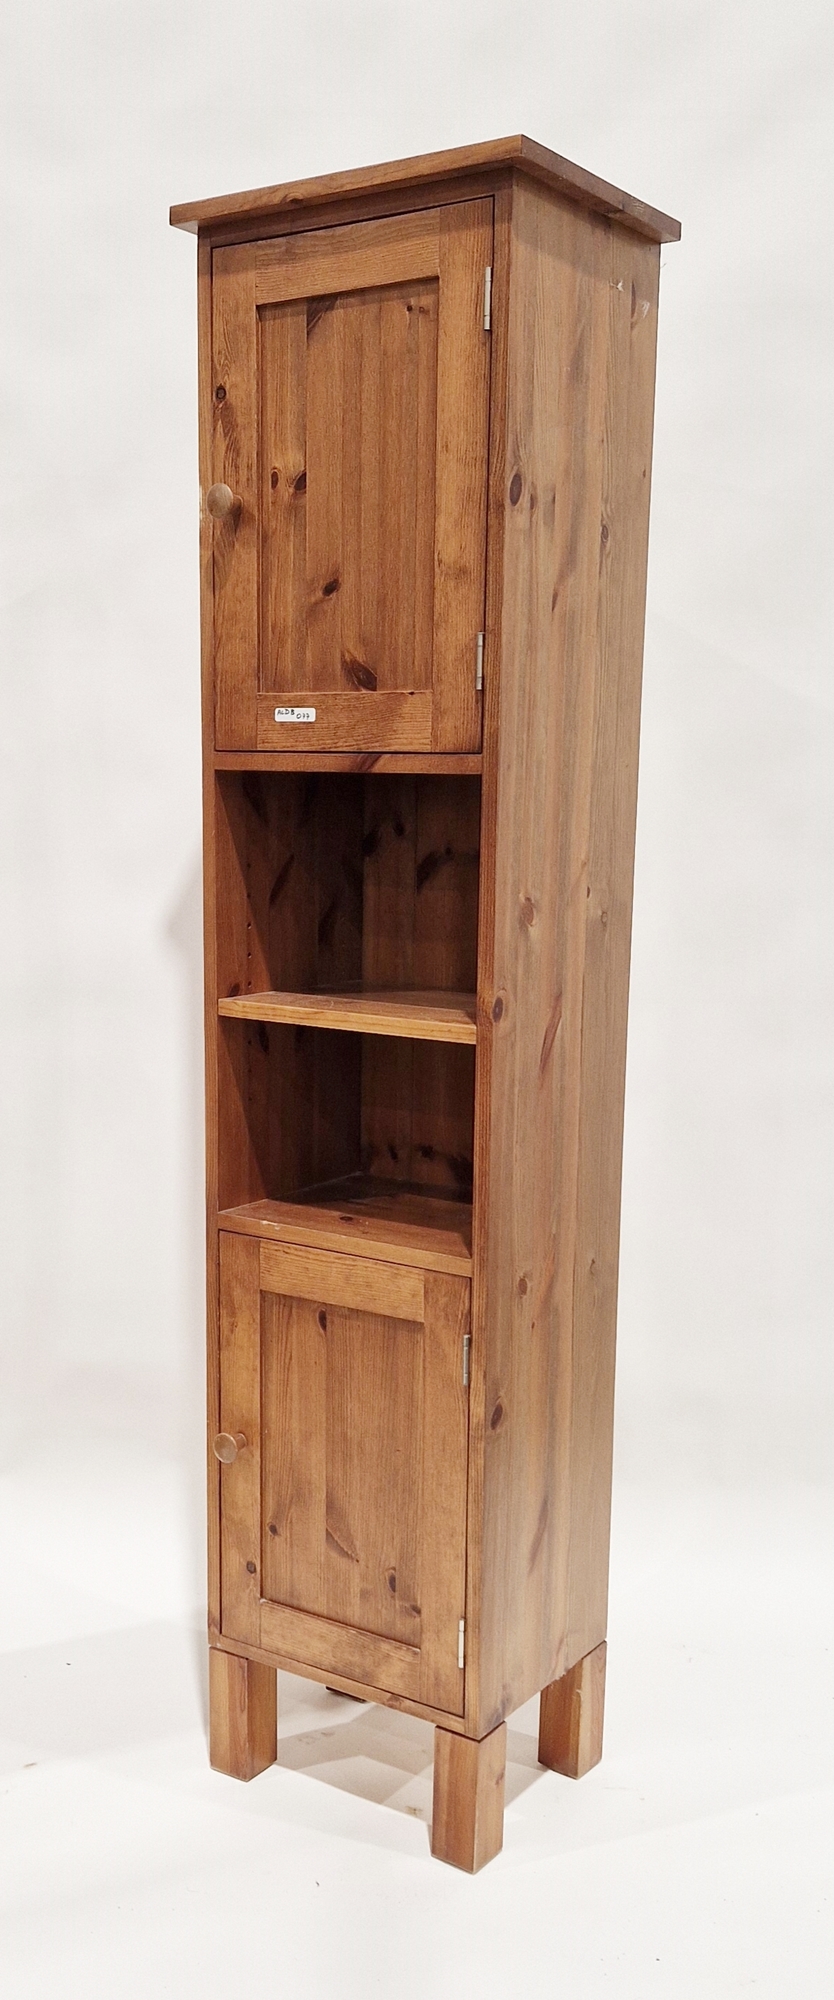 Pine storage unit having three shelves, three drawers and a single door cupboard, 178cm high x - Image 3 of 3